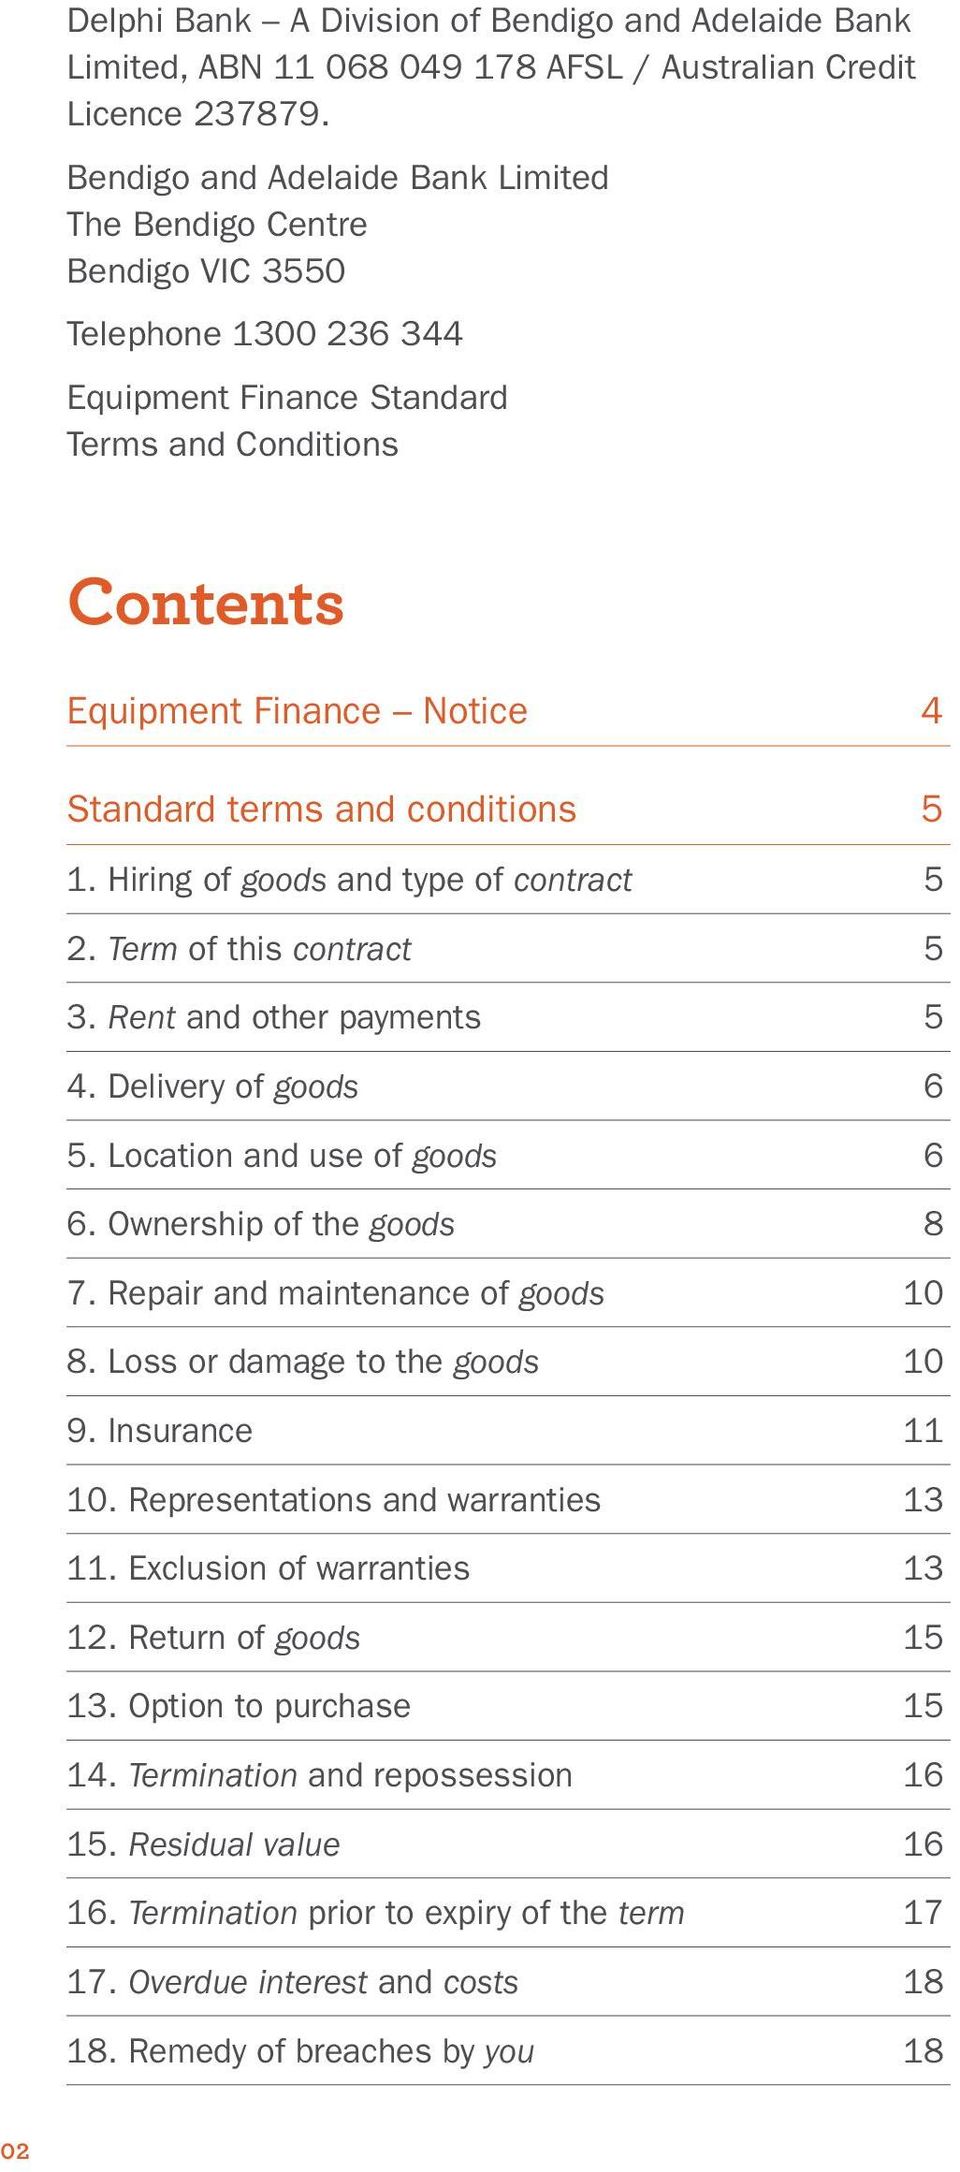 conditions 5 1. Hiring of goods and type of contract 5 2. Term of this contract 5 3. Rent and other payments 5 4. Delivery of goods 6 5. Location and use of goods 6 6. Ownership of the goods 8 7.